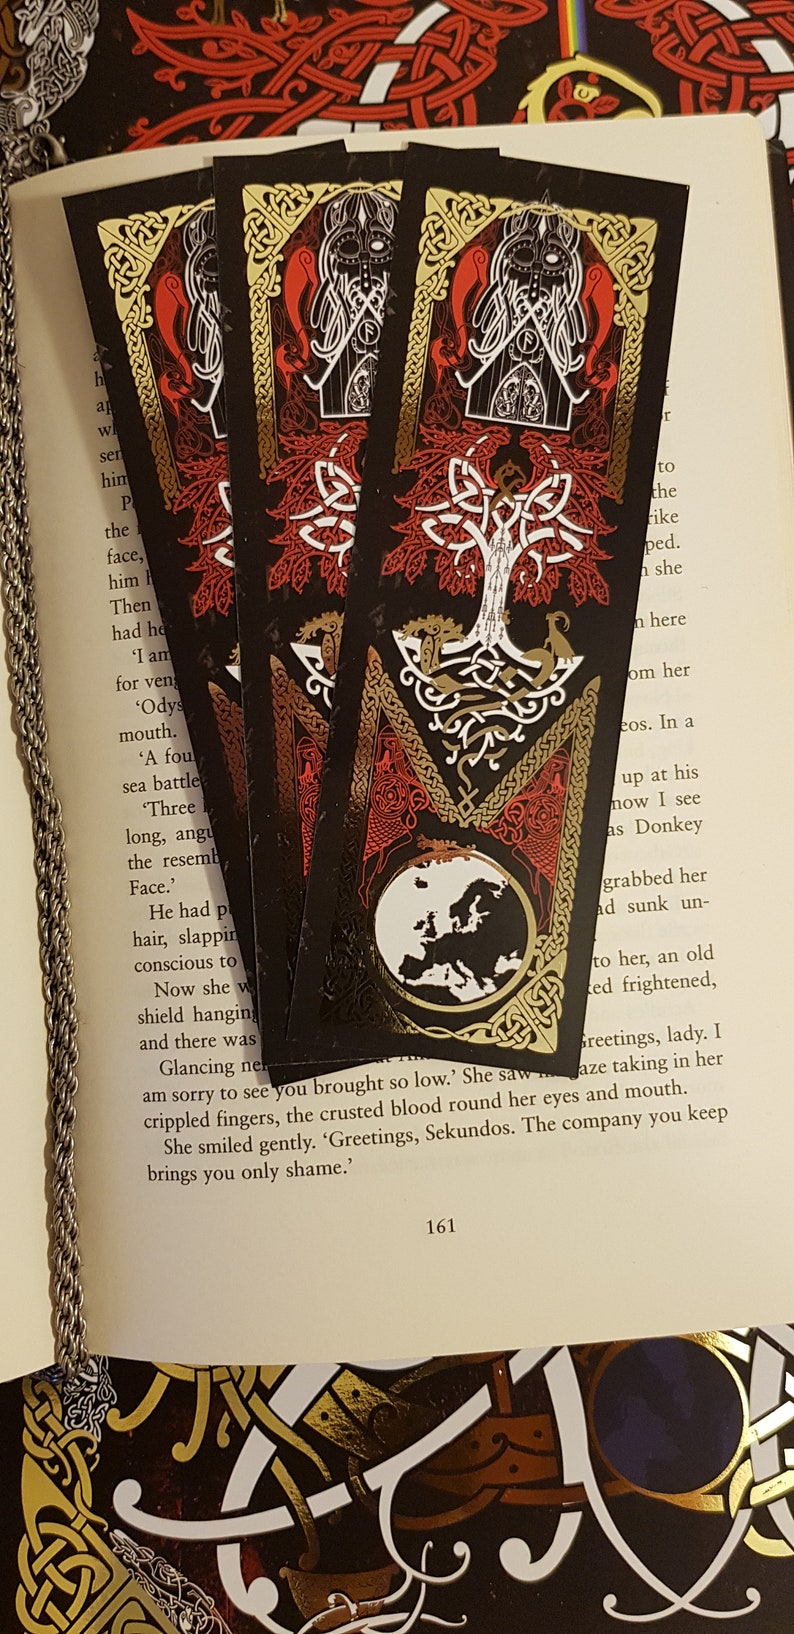 Bookmarks strewn over an open page of a book. Yggdrasil Gold Foil Double-Sided Bookmark with a Nordic style depiction of the life tree and the world in the colours of black, red, white and gold on one side.